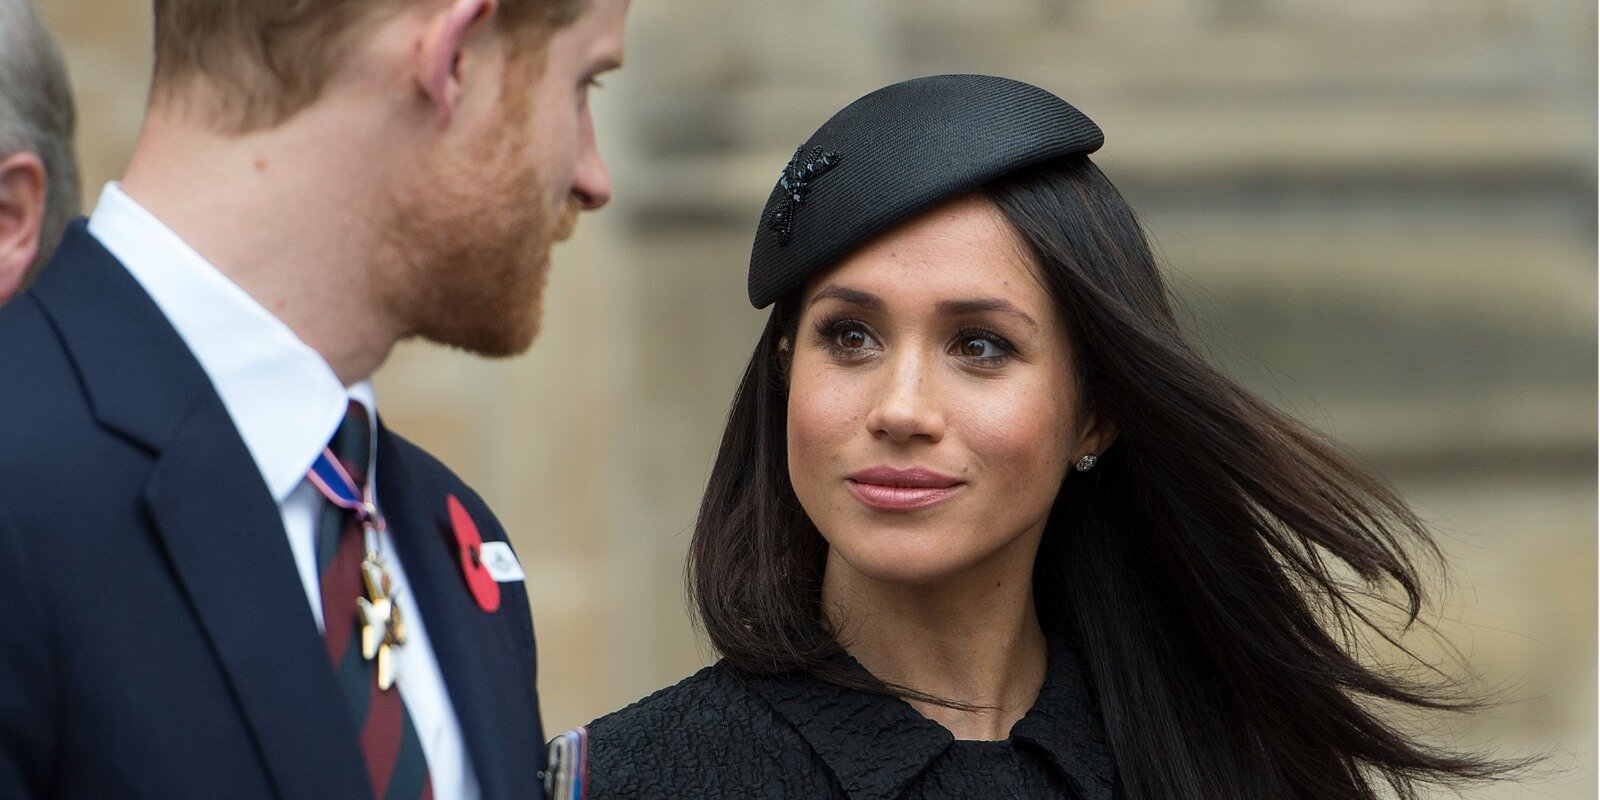 Prince Harry looks at Meghan Markle during Anzac Day service at Westminster Abbey on April 25, 2018 in London, England.